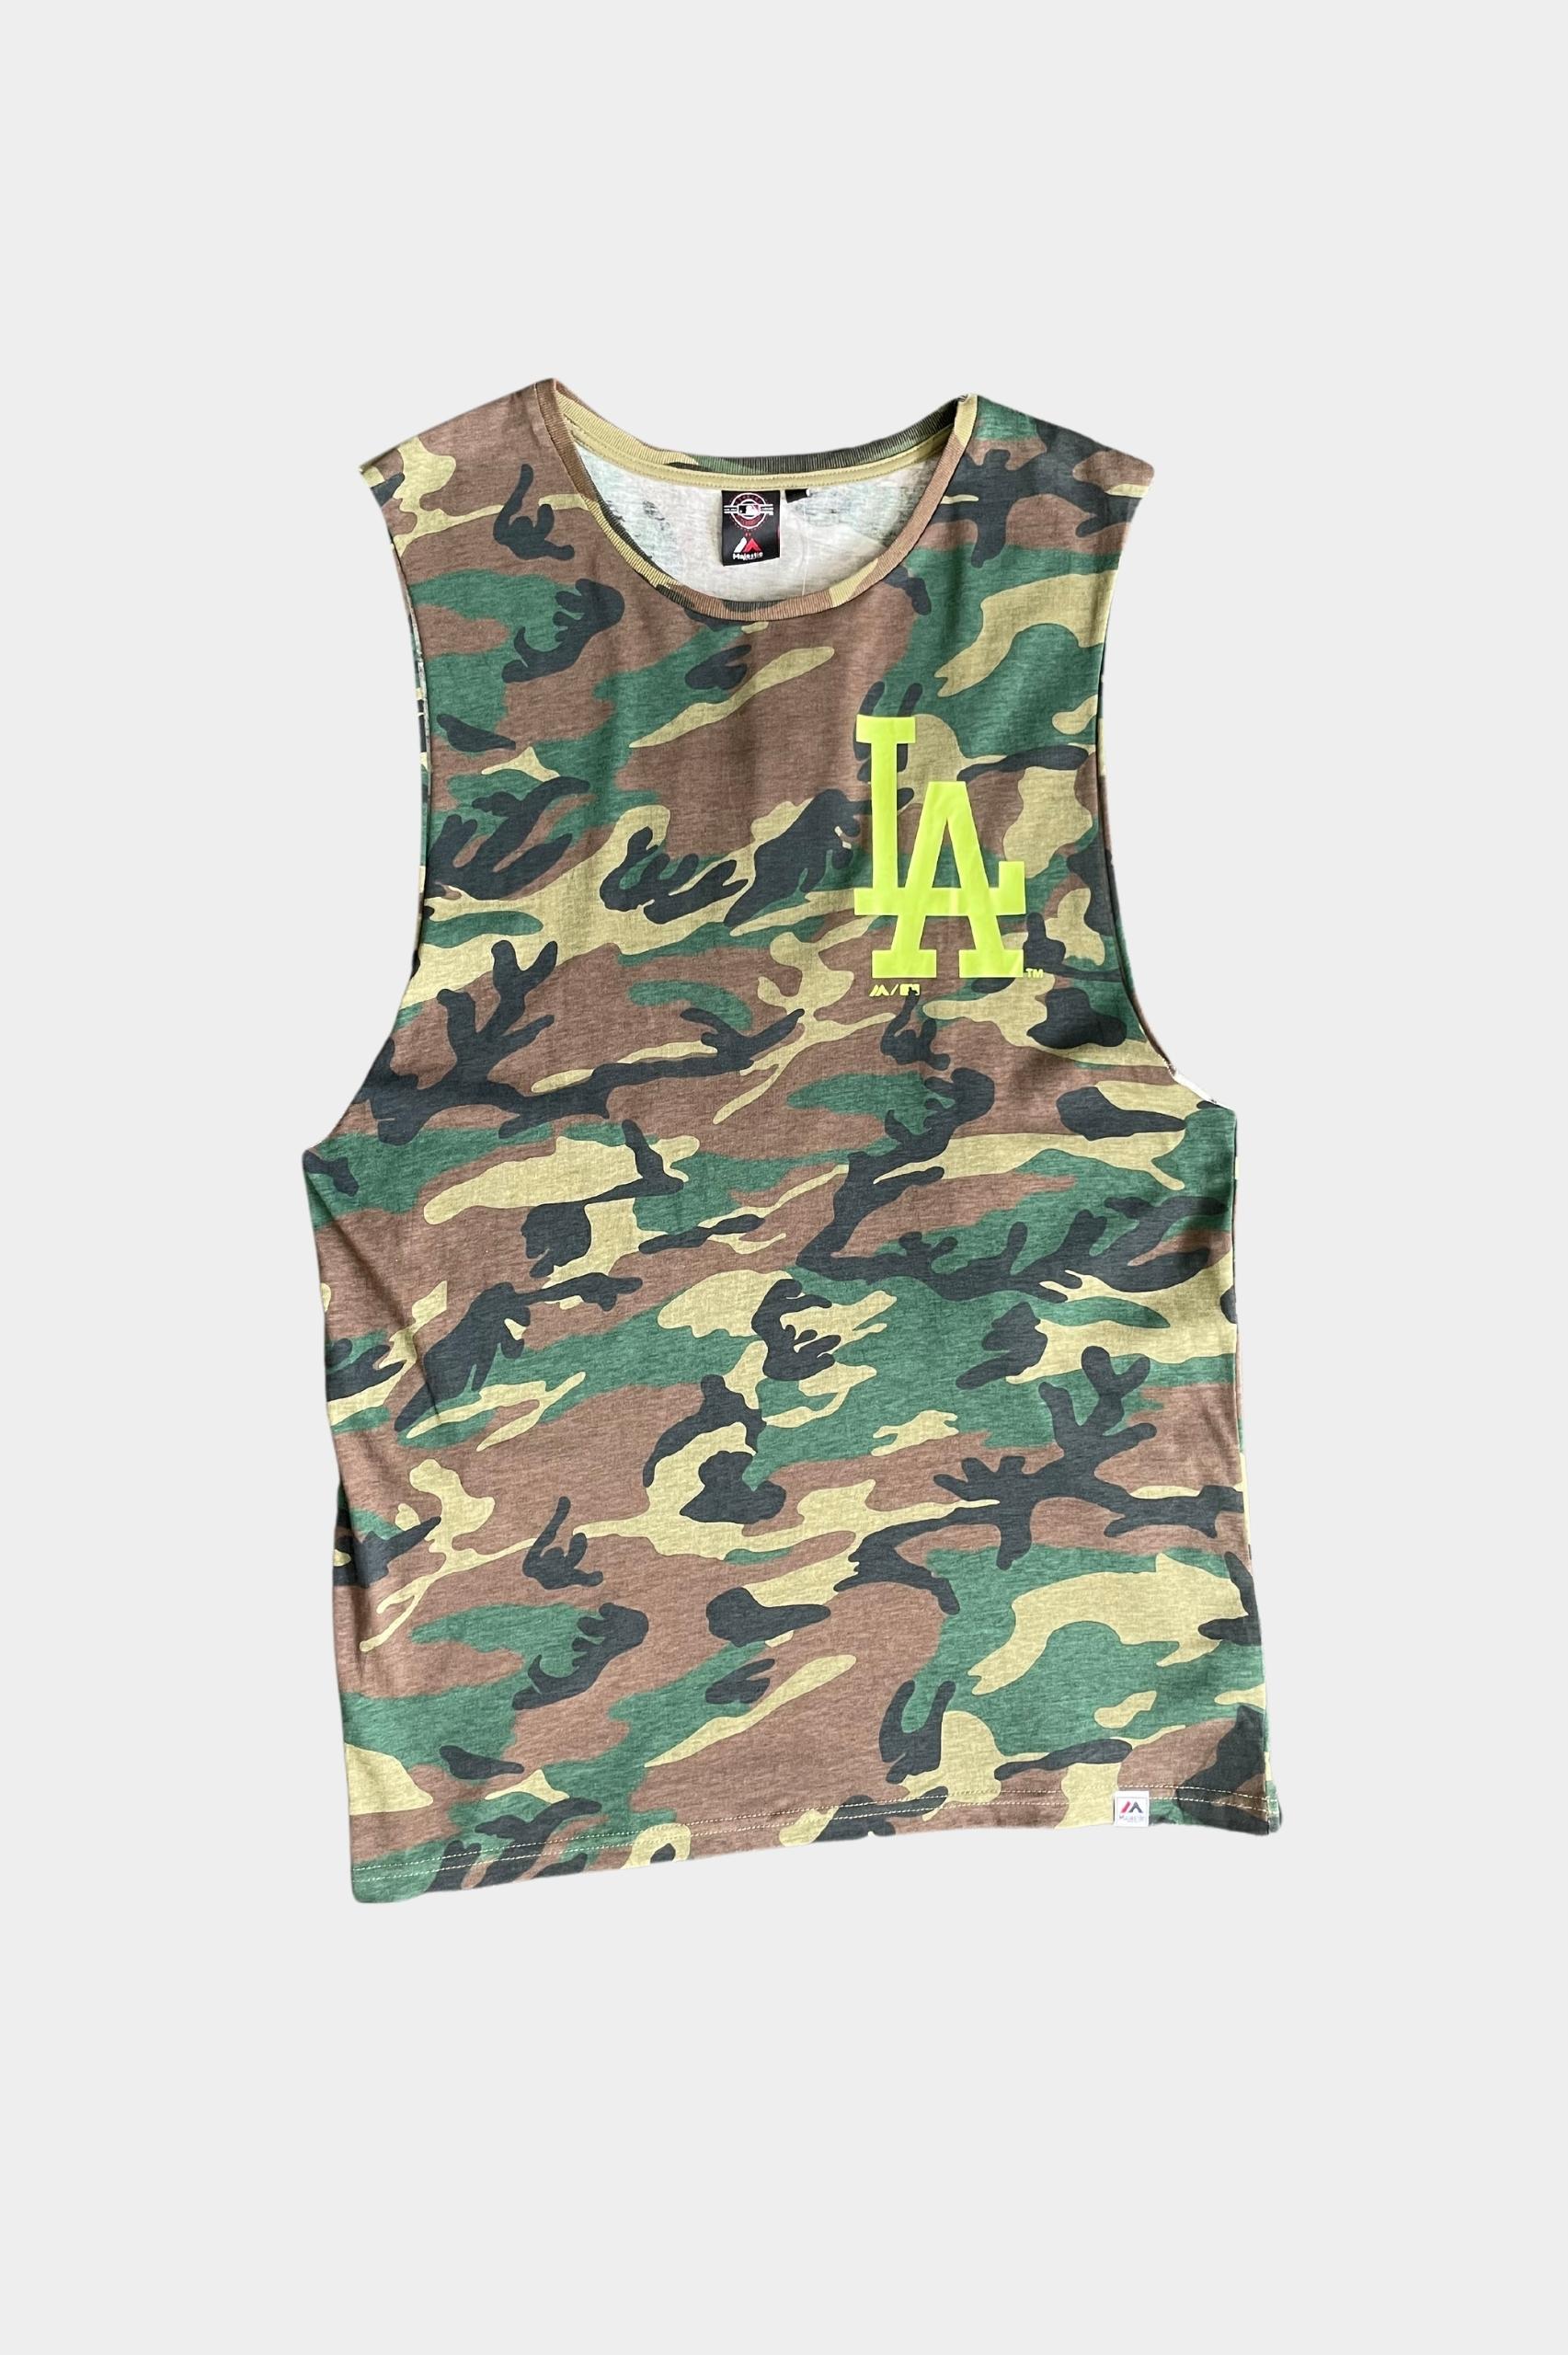 Majestic L.A Dodgers Muscle Tee - Camo/Green